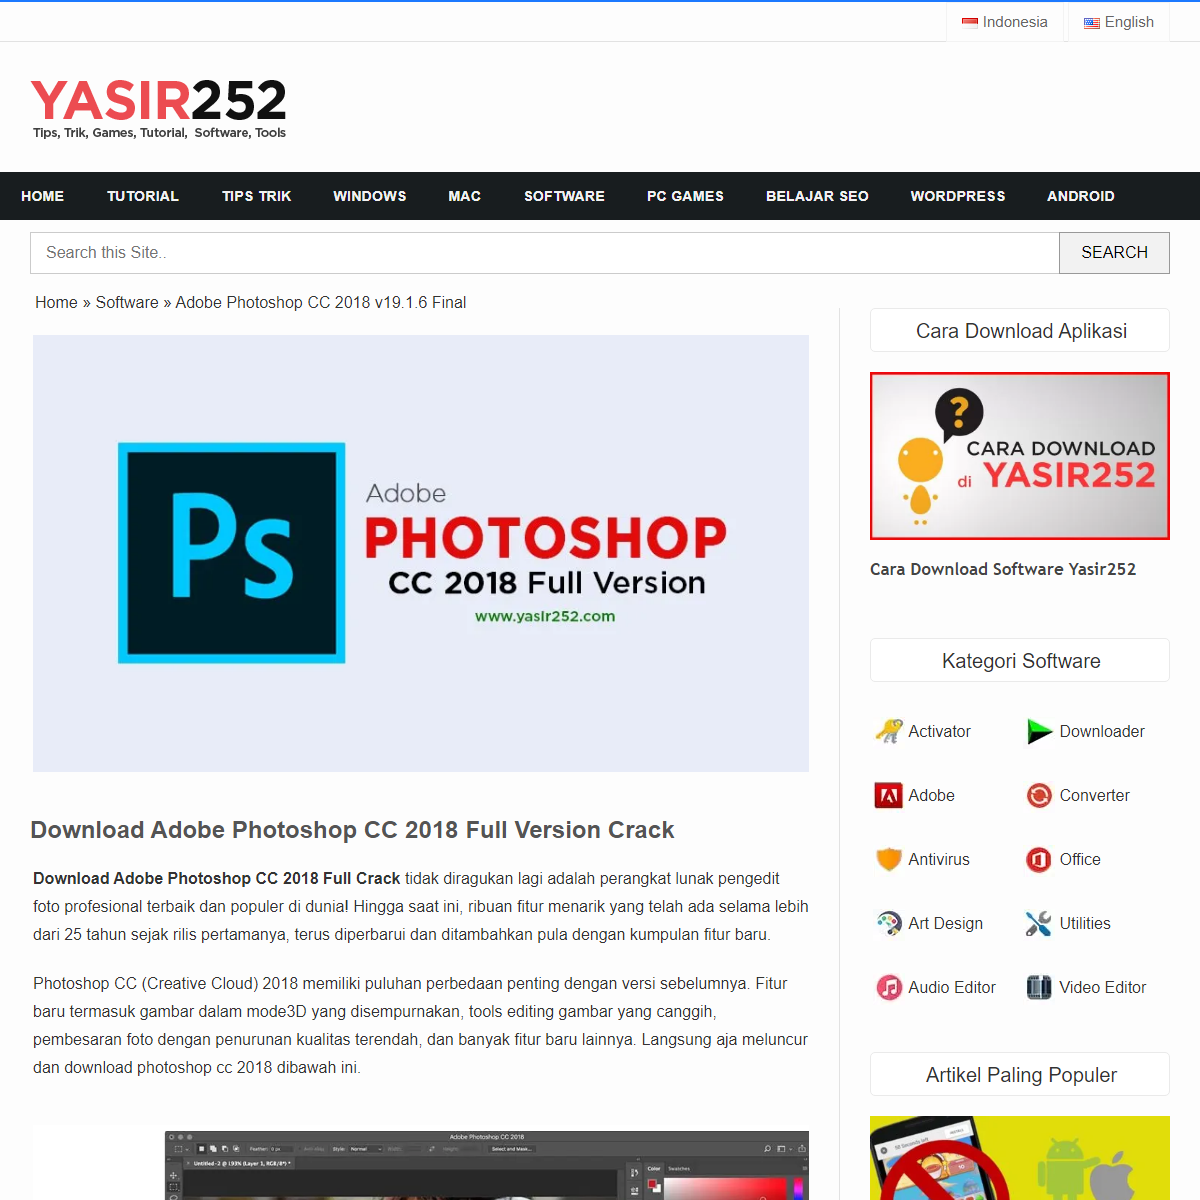 A complete backup of https://www.yasir252.com/software/download-adobe-photoshop-cc-2018-full/